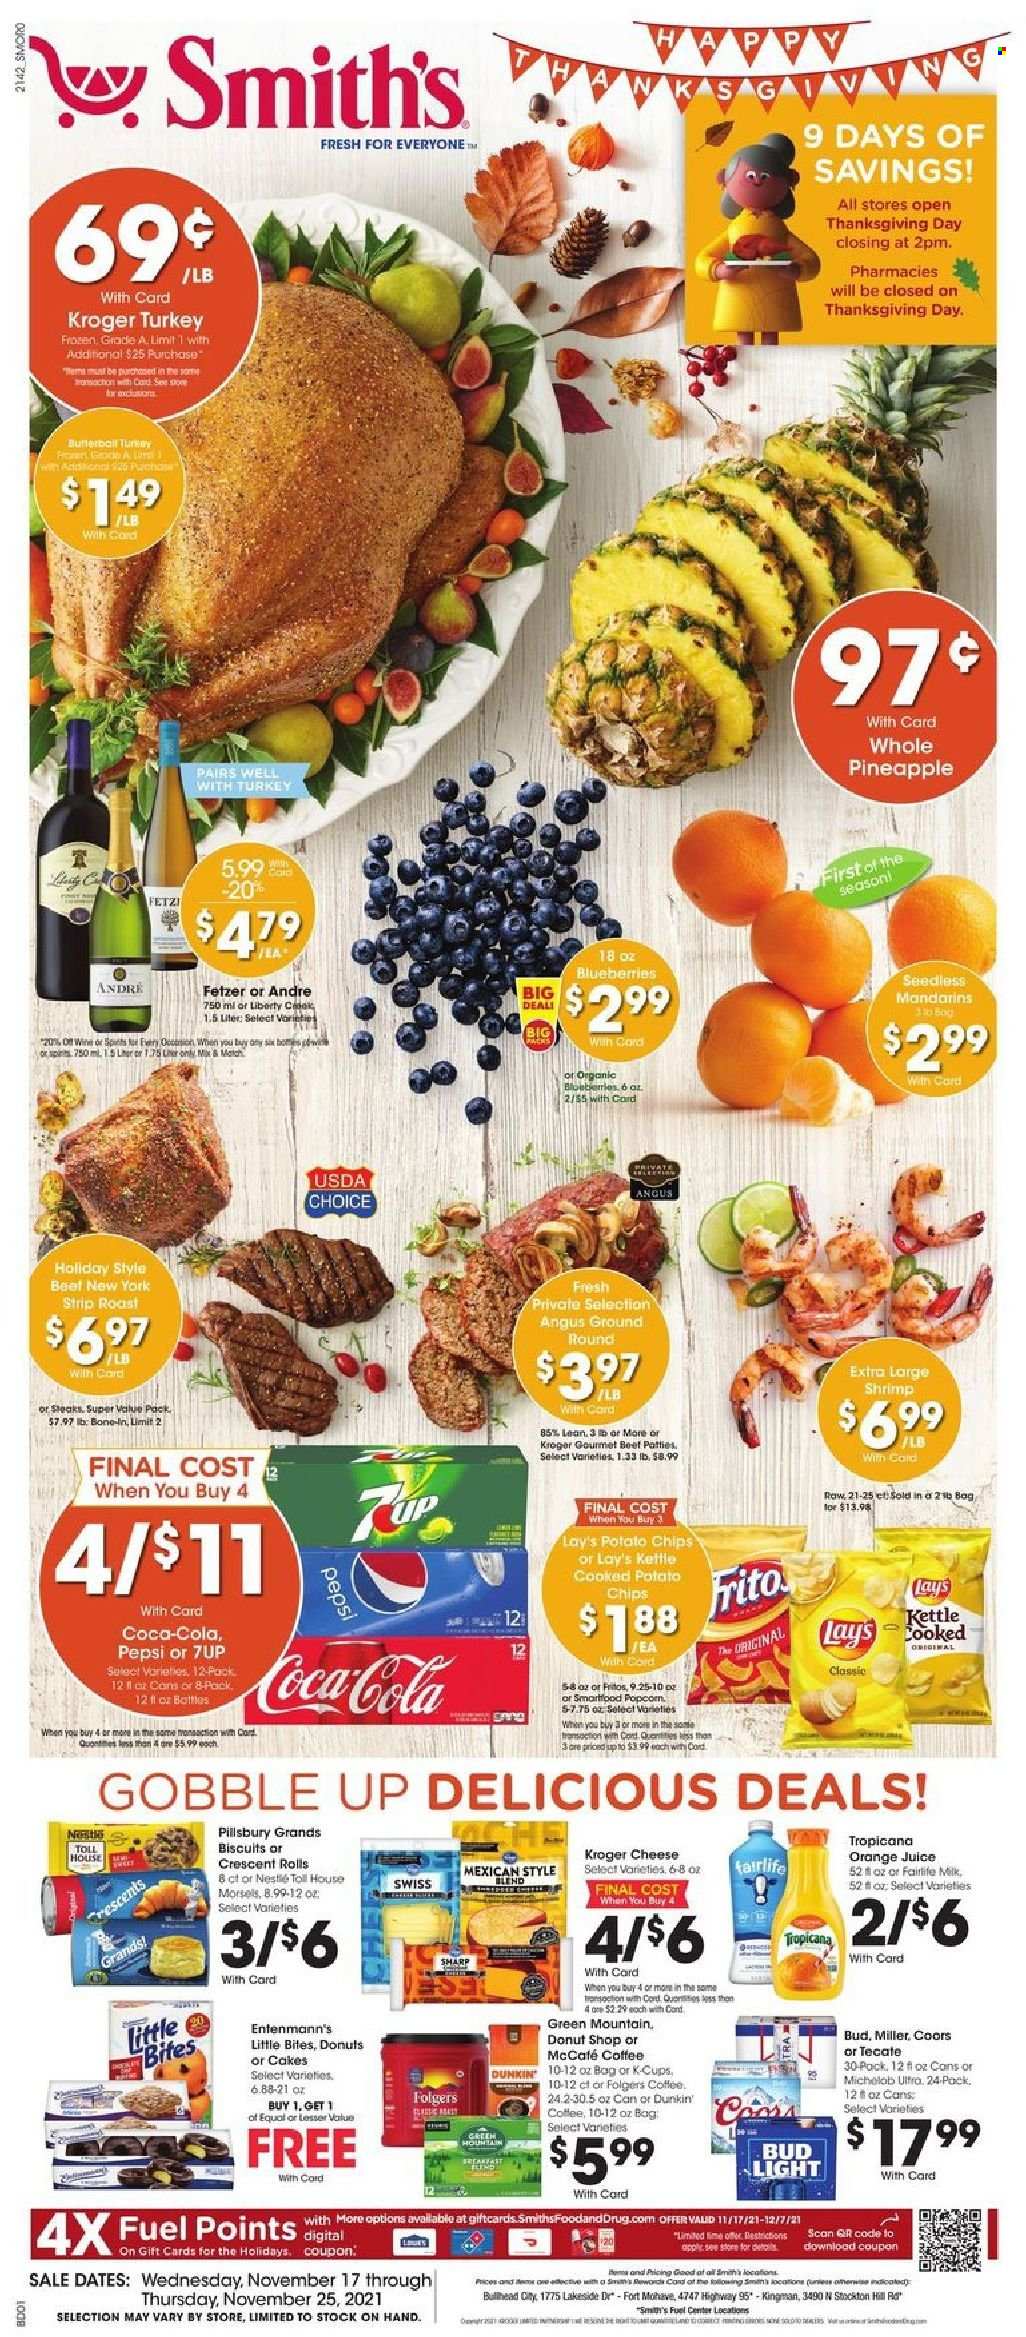 thumbnail - Smith's Flyer - 11/17/2021 - 11/25/2021 - Sales products - cake, crescent rolls, Entenmann's, blueberries, mandarines, pineapple, shrimps, cheese, milk, Nestlé, biscuit, Little Bites, Fritos, potato chips, Lay’s, Smartfood, Smith's, Coca-Cola, Pepsi, orange juice, juice, 7UP, coffee, Folgers, Green Mountain, wine, beer, Bud Light, Miller, Coors. Page 1.